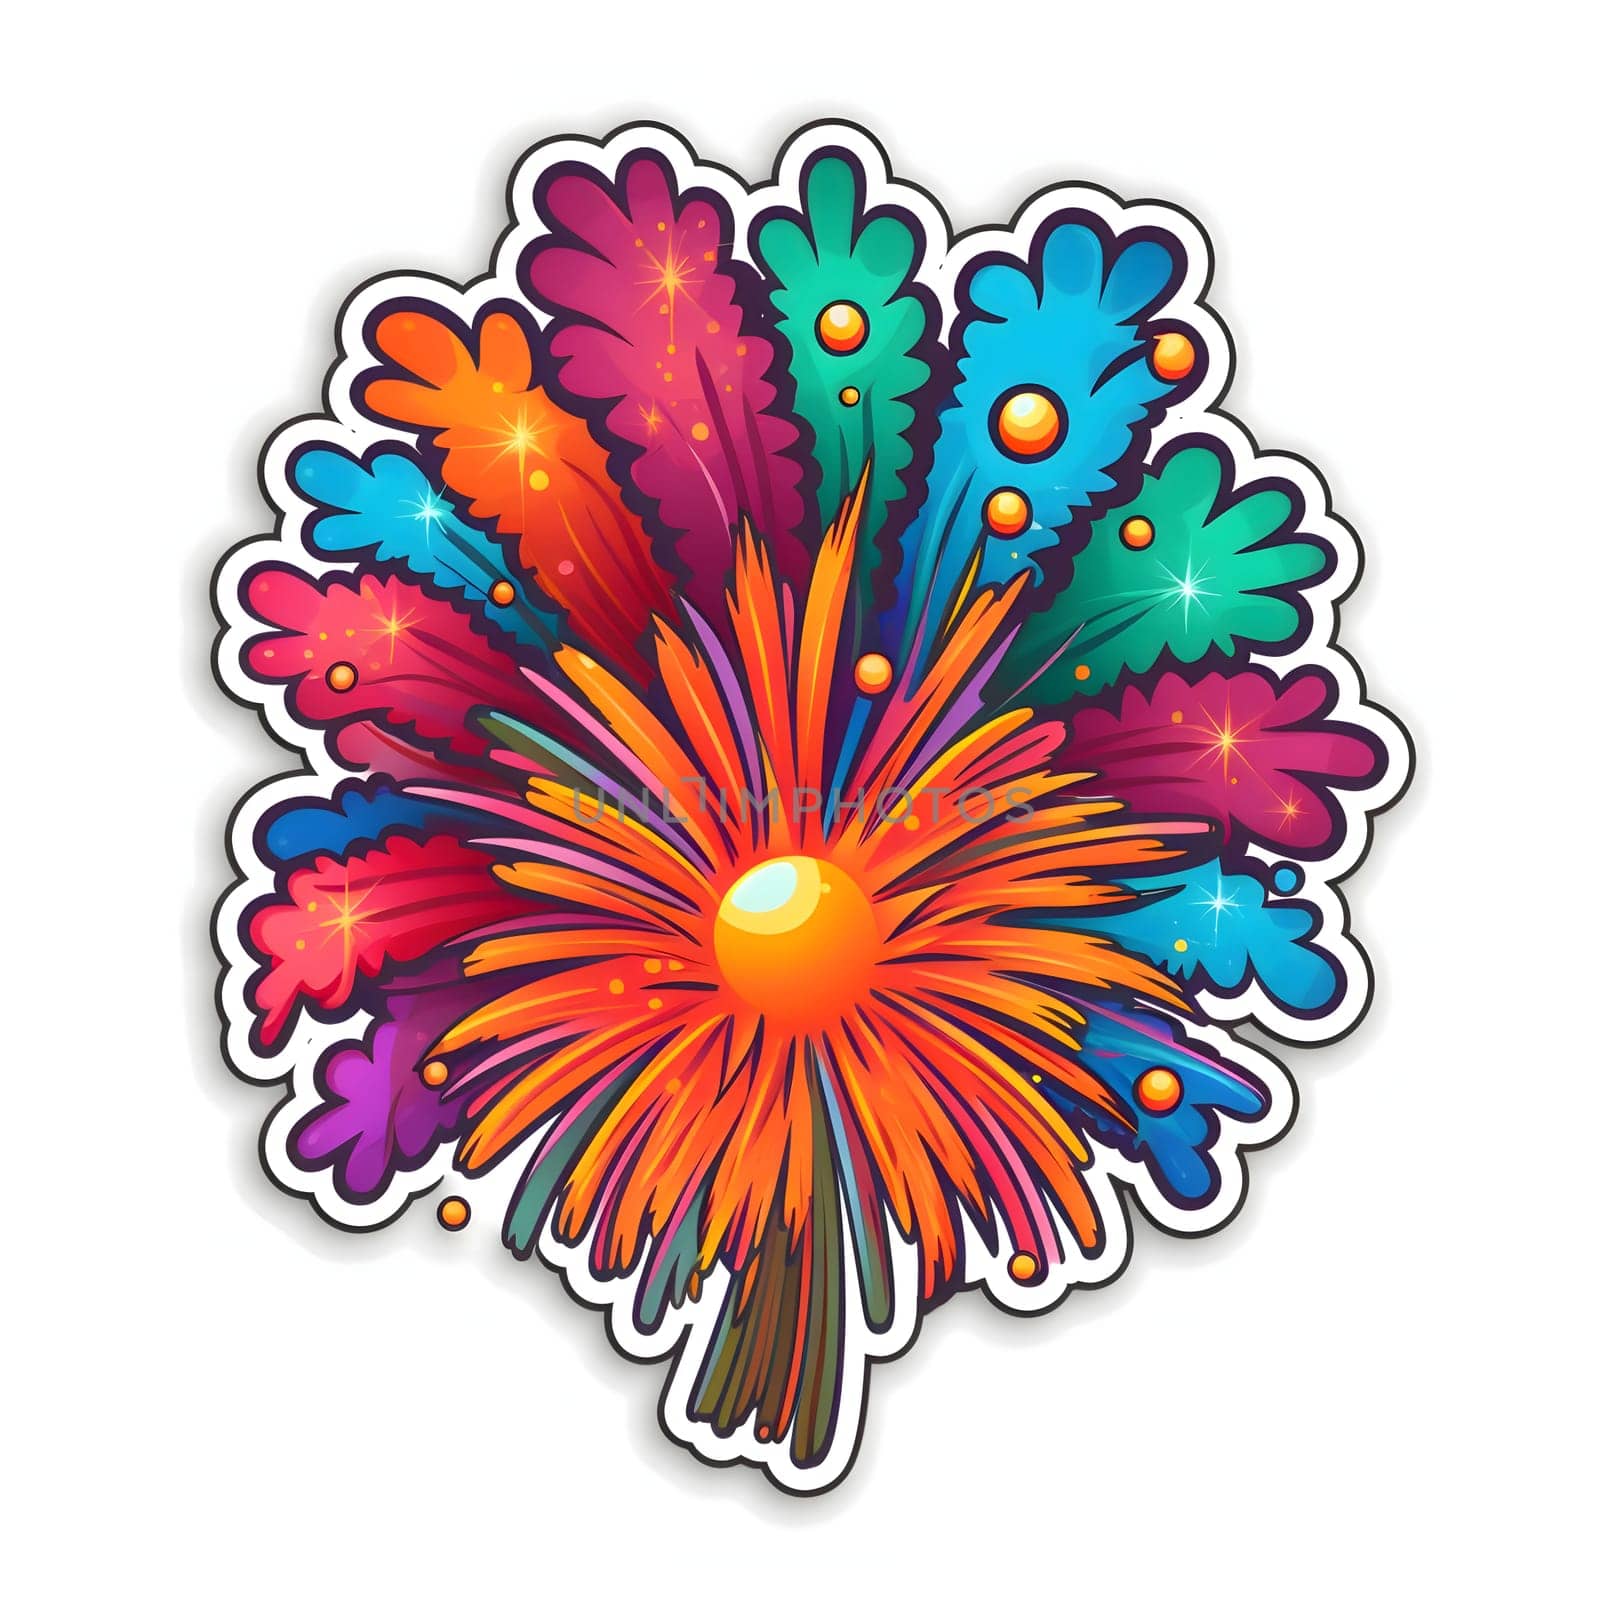 Sticker shots of colorful fireworks. New Year's party and celebrations. by ThemesS